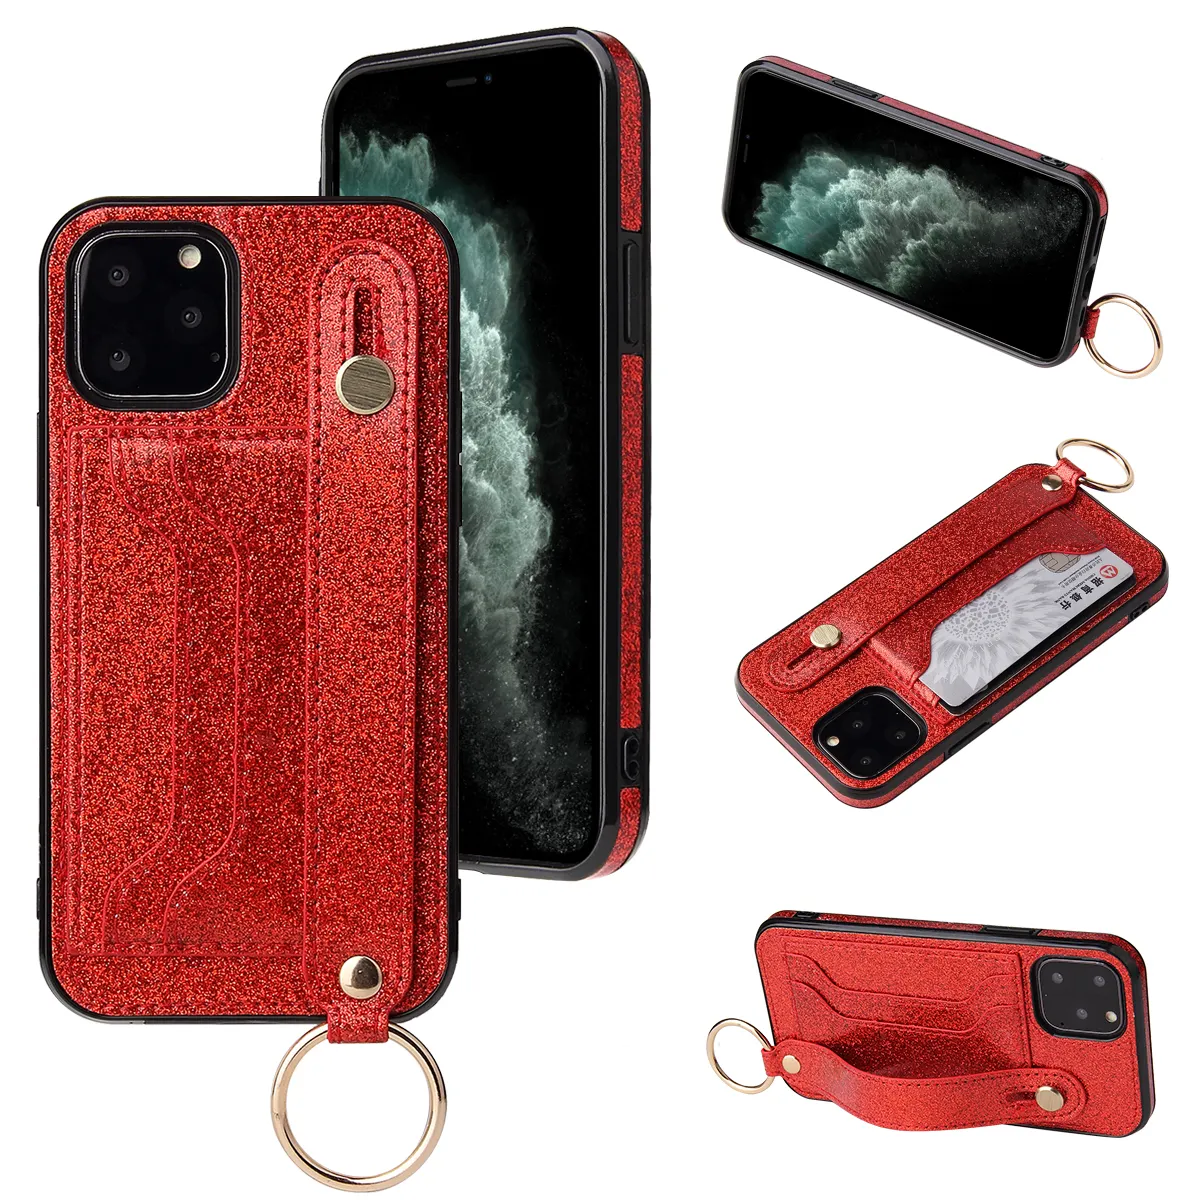 IVANHOE Glitter Bling Case For iPhone 12 7 8 6 6S Plus 5S 11 Pro Max Funda Leather Flip Book Case for iPhone X XR XS Max Cover